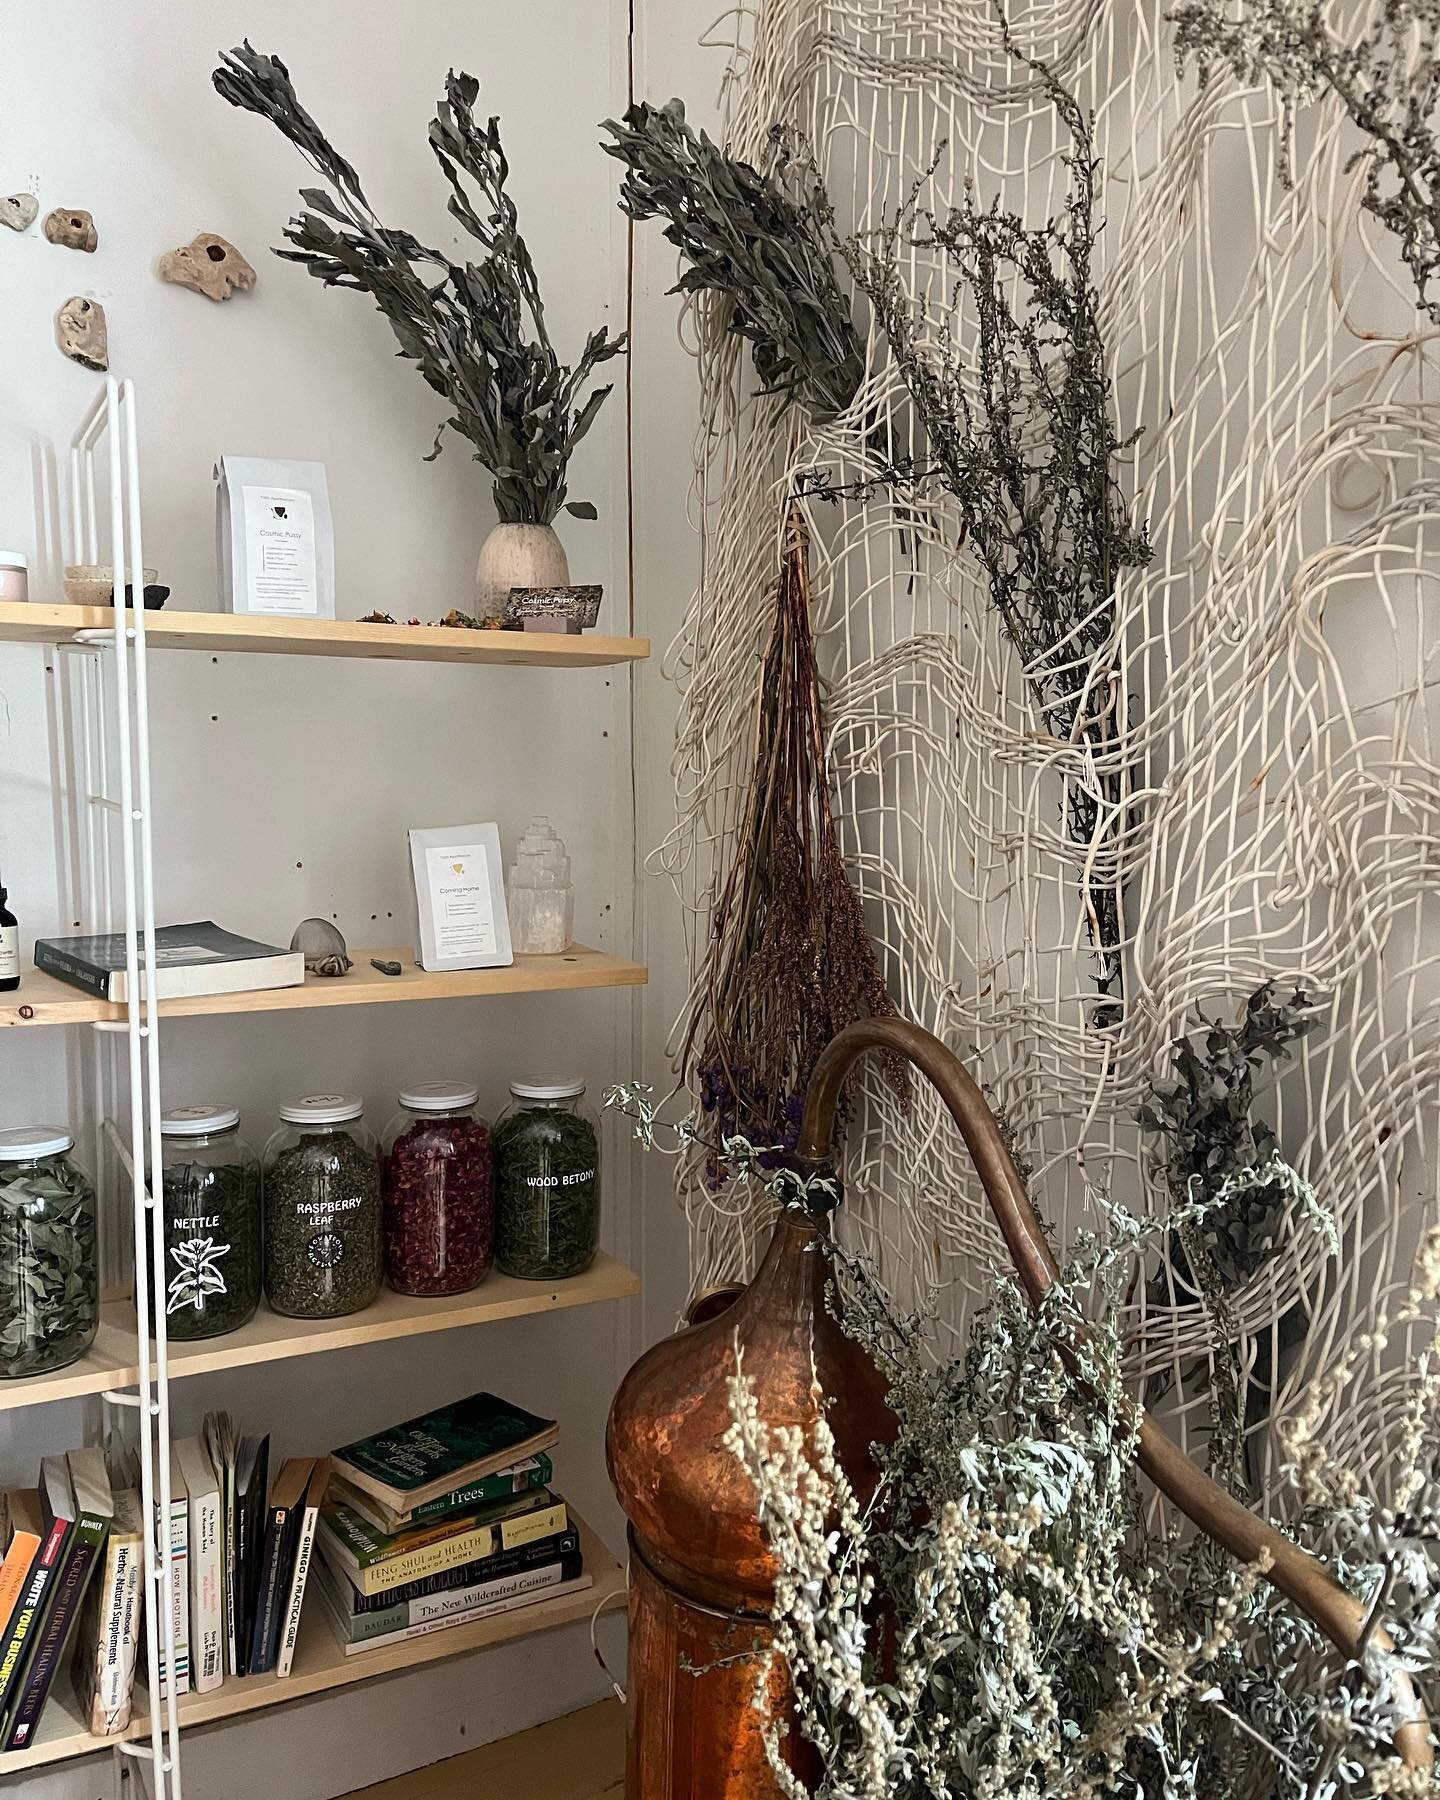 Apothecary Announcement 

We have been open here and there this year and want to make it official&hellip;

We will have in-store hours on Wednesday &amp; Friday from 1-6pm 

We have bulk herbs, tinctures, skincare and seasonal offerings. 

Locals spr